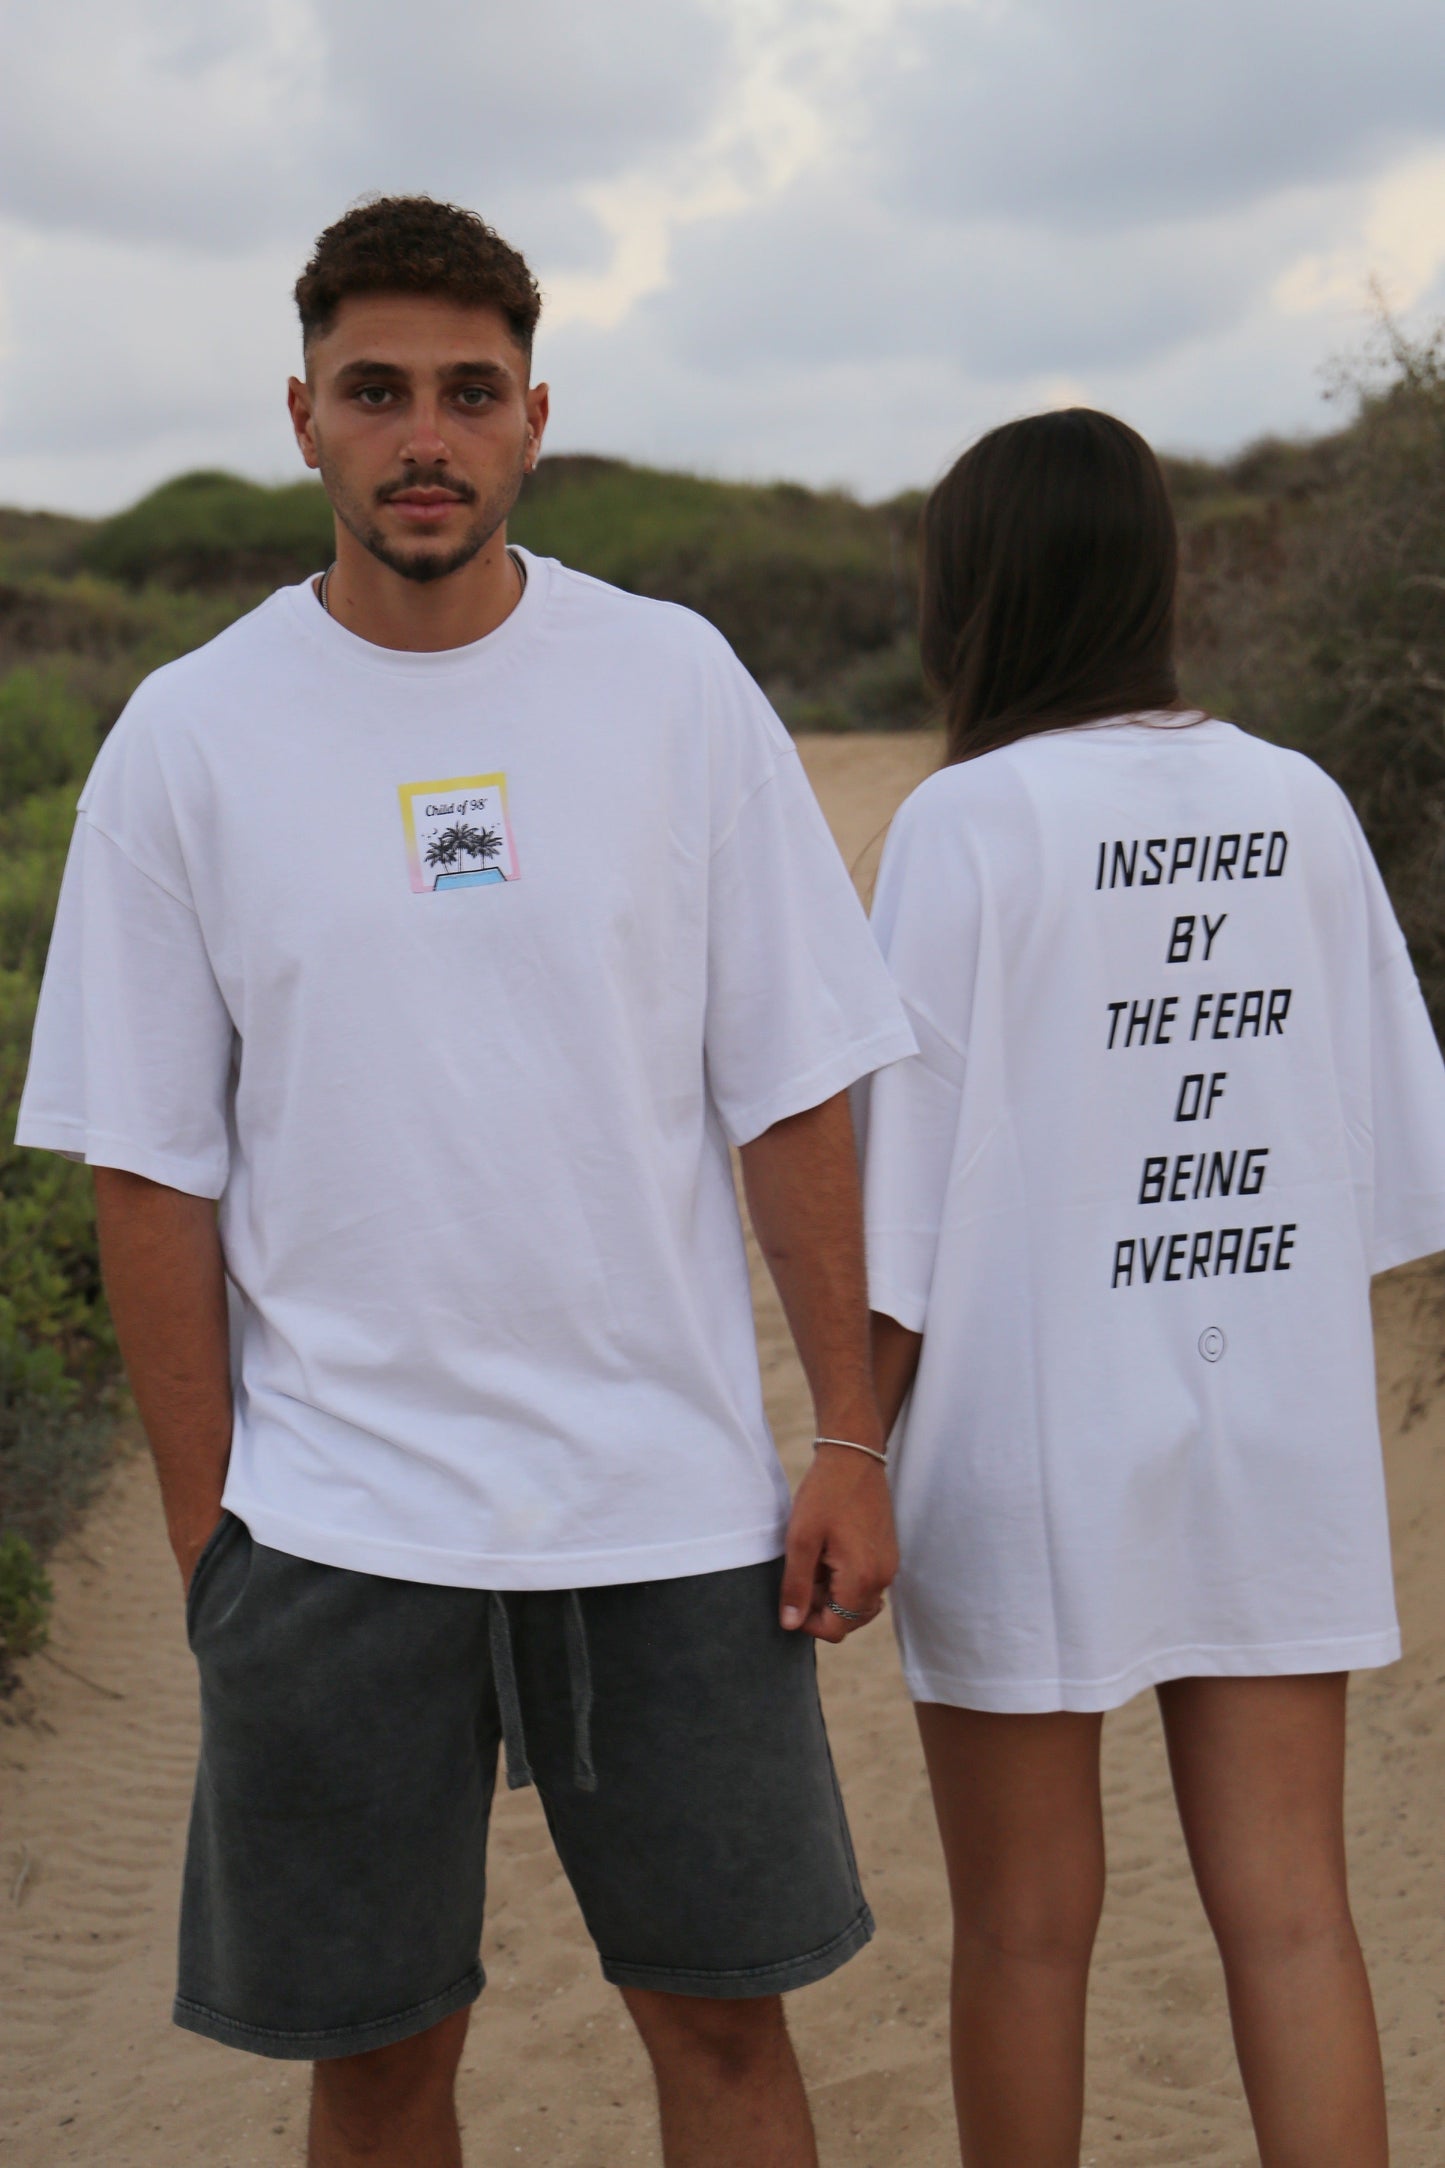 Child of 98' official logo T-shirt - White “inspired by the fear of being average“